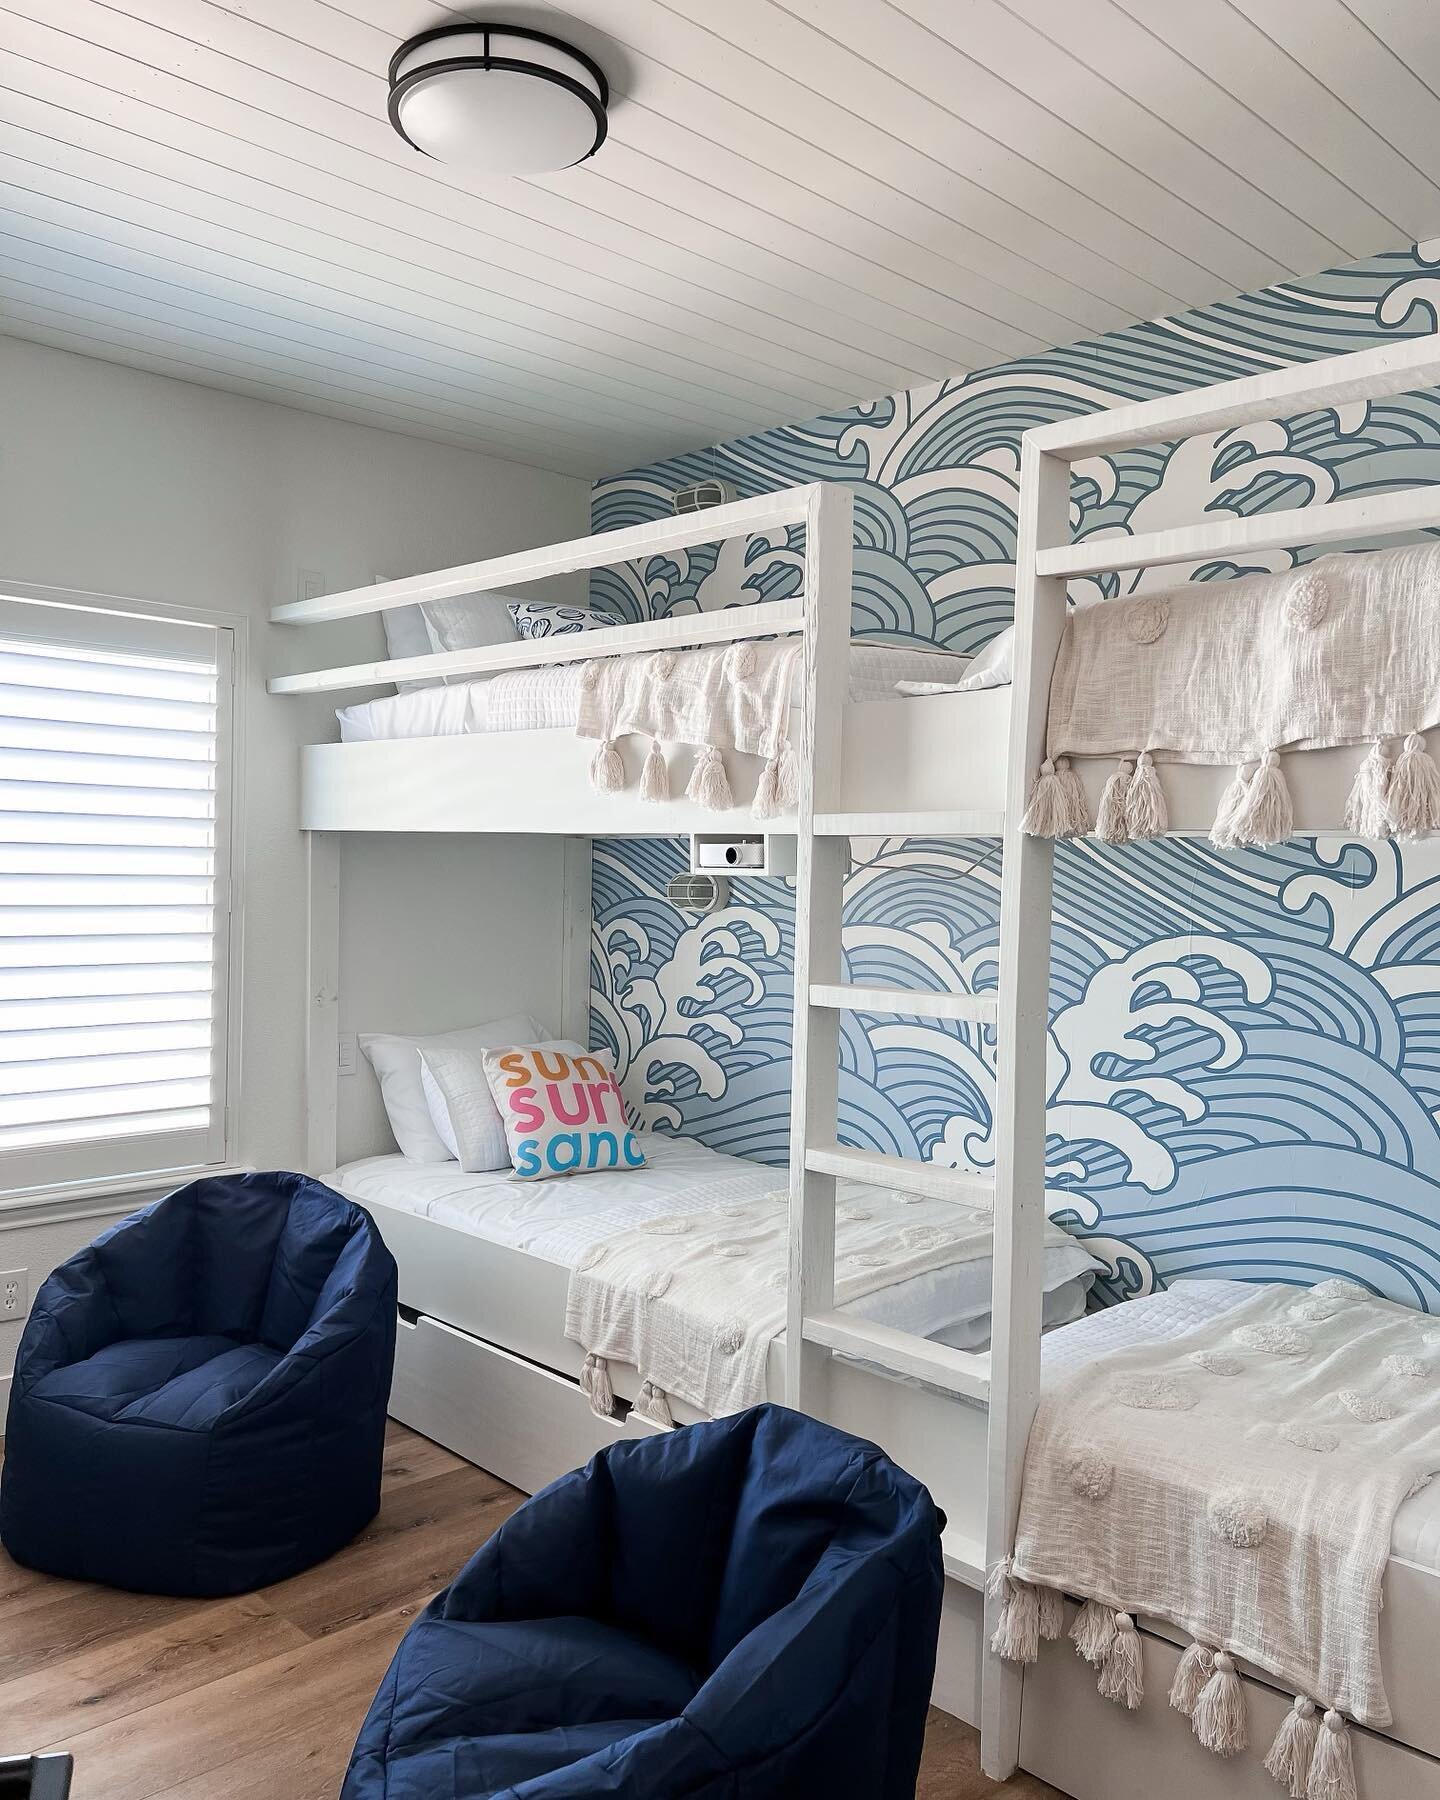 Who&rsquo;s ready for the new episode of #battleonthebeach!?Last week we created this fun kids room and loved how it turned out - who&rsquo;s room was your favourite? One things for sure: we will not be doing wallpaper ever again. 🙃 See what we come